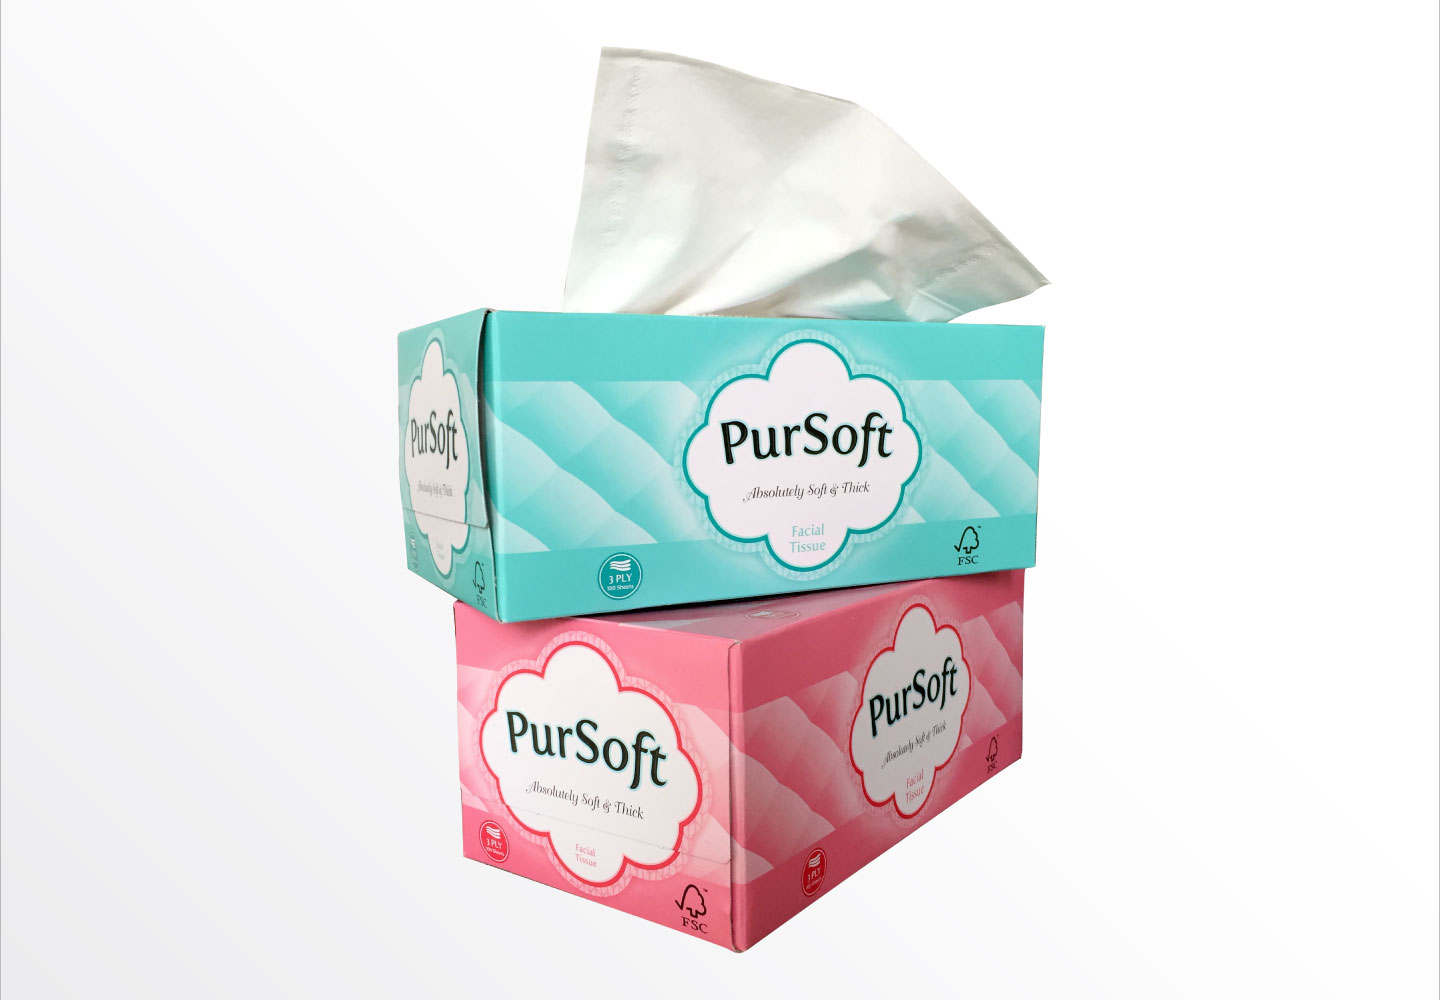 Brand Consultancy in FMCG Industry. Packaging design for Pursoft.